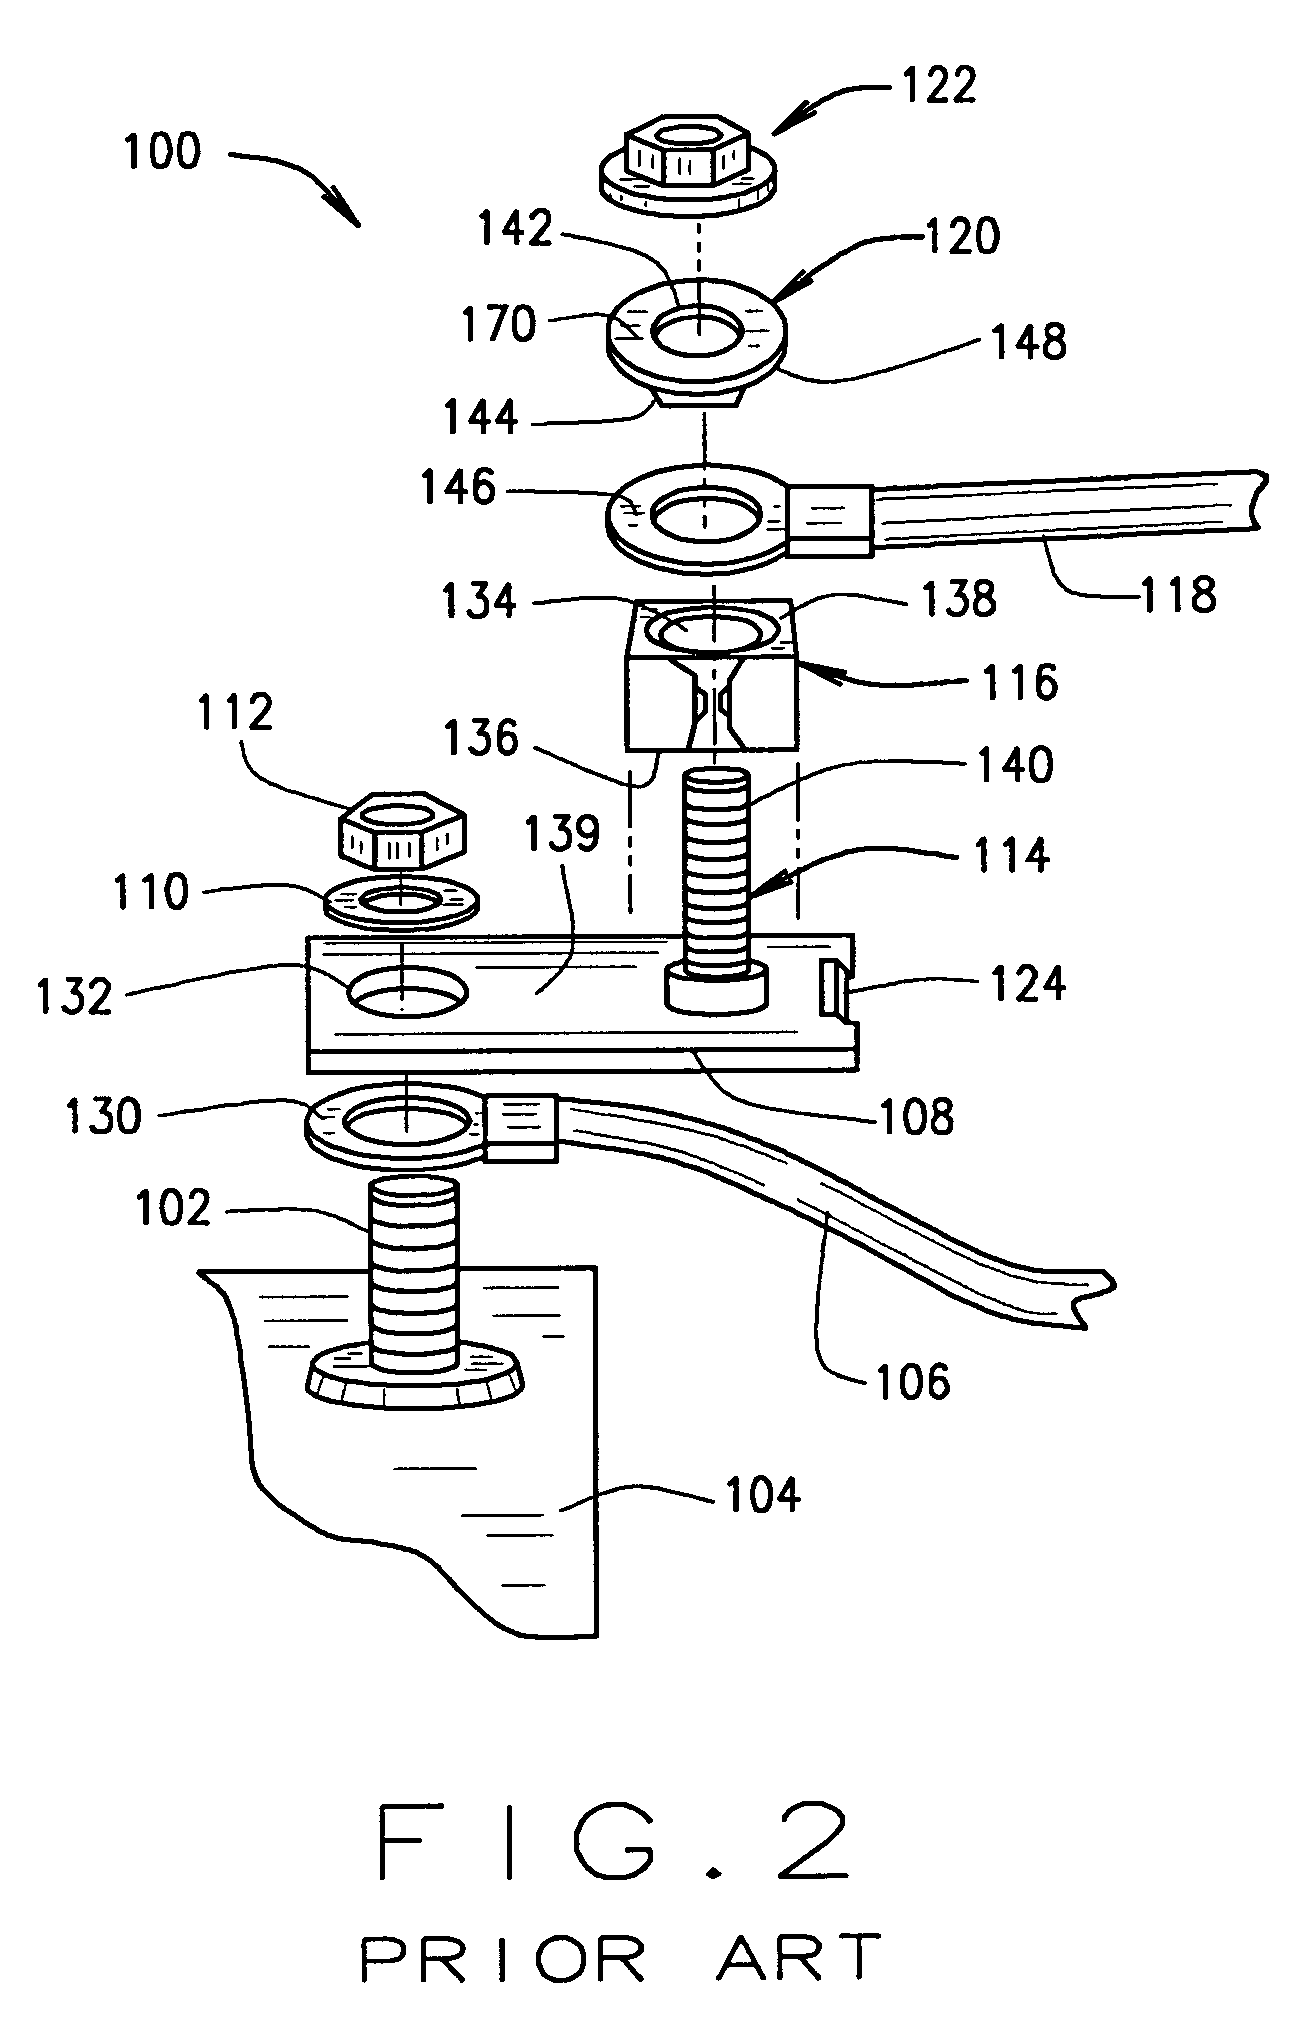 Insulated cable termination assembly and method of fabrication